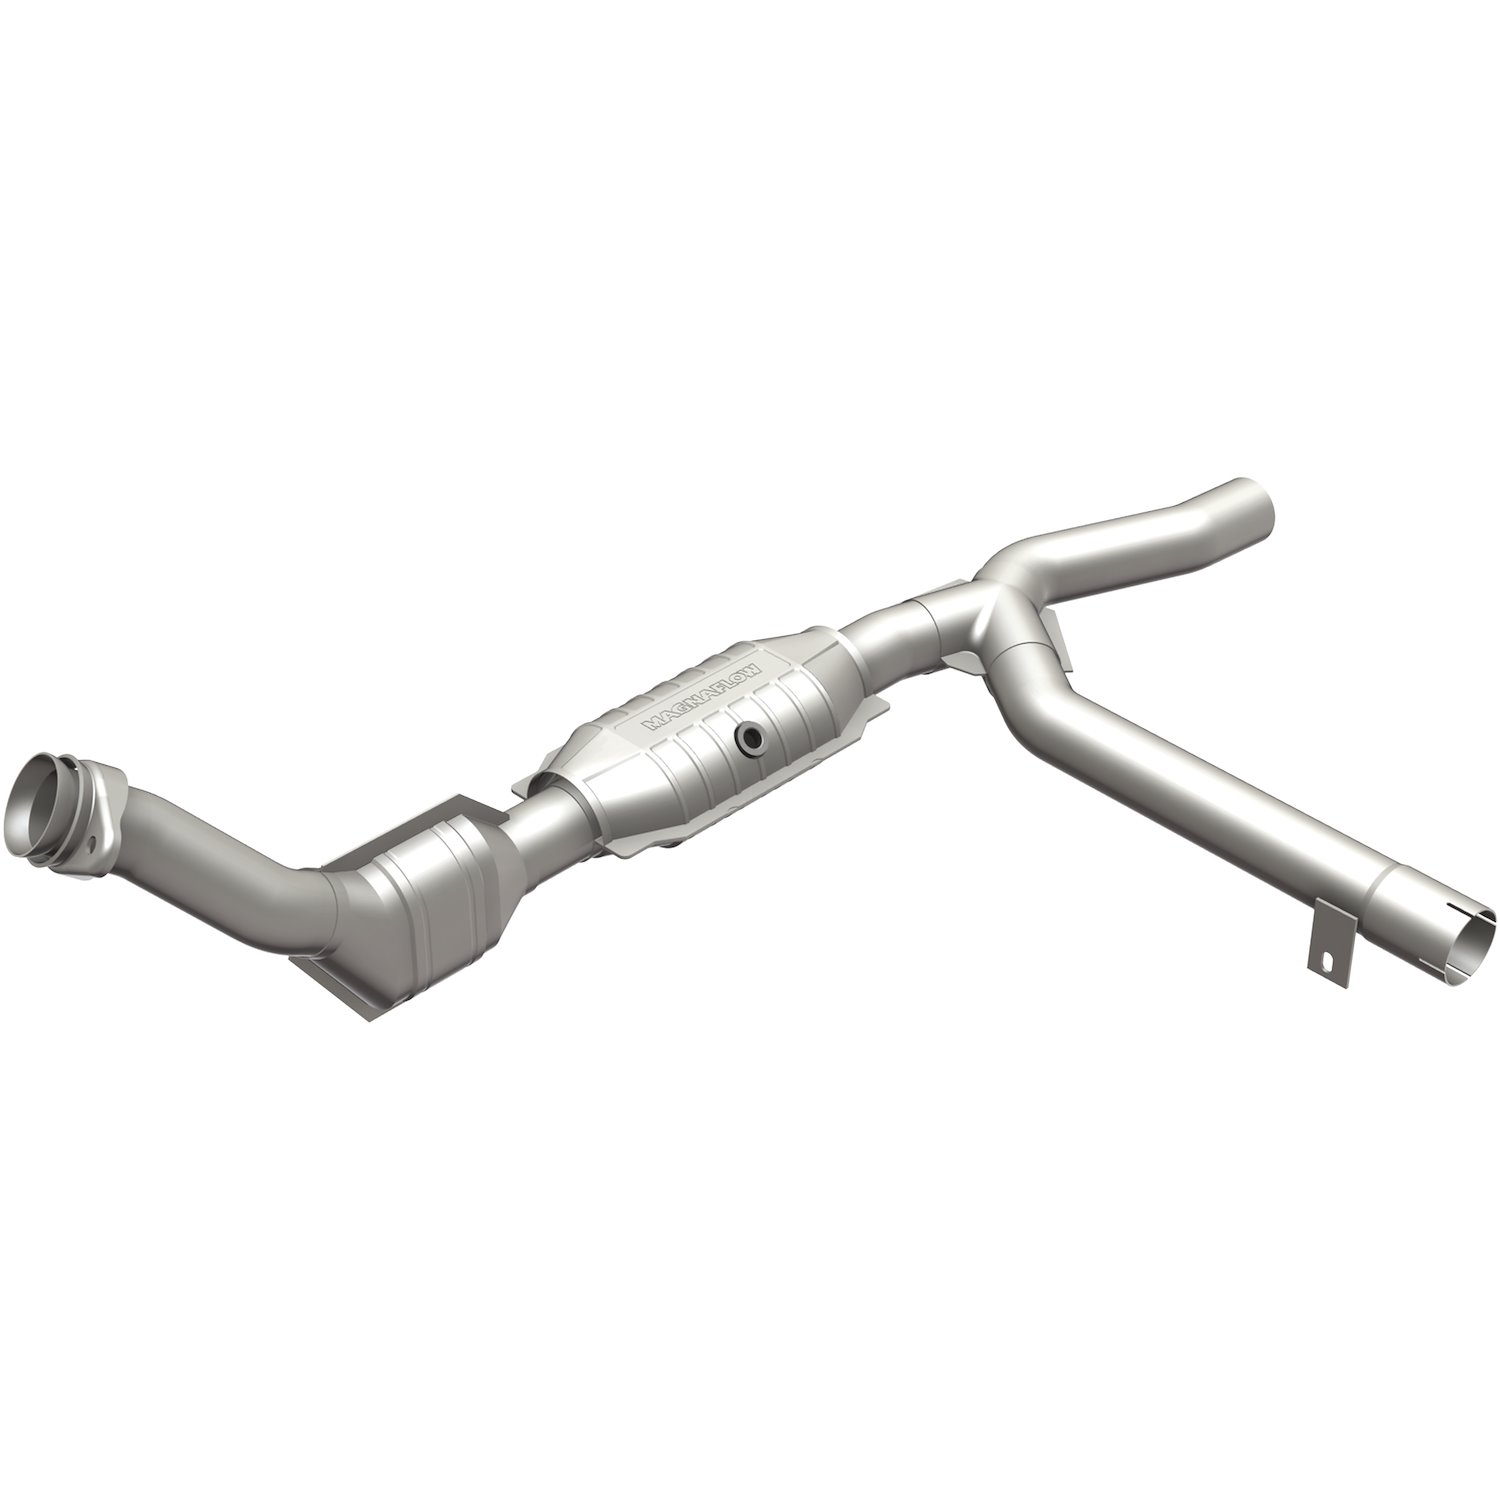 OEM Grade Federal / EPA Compliant Direct-Fit Catalytic Converter 51199